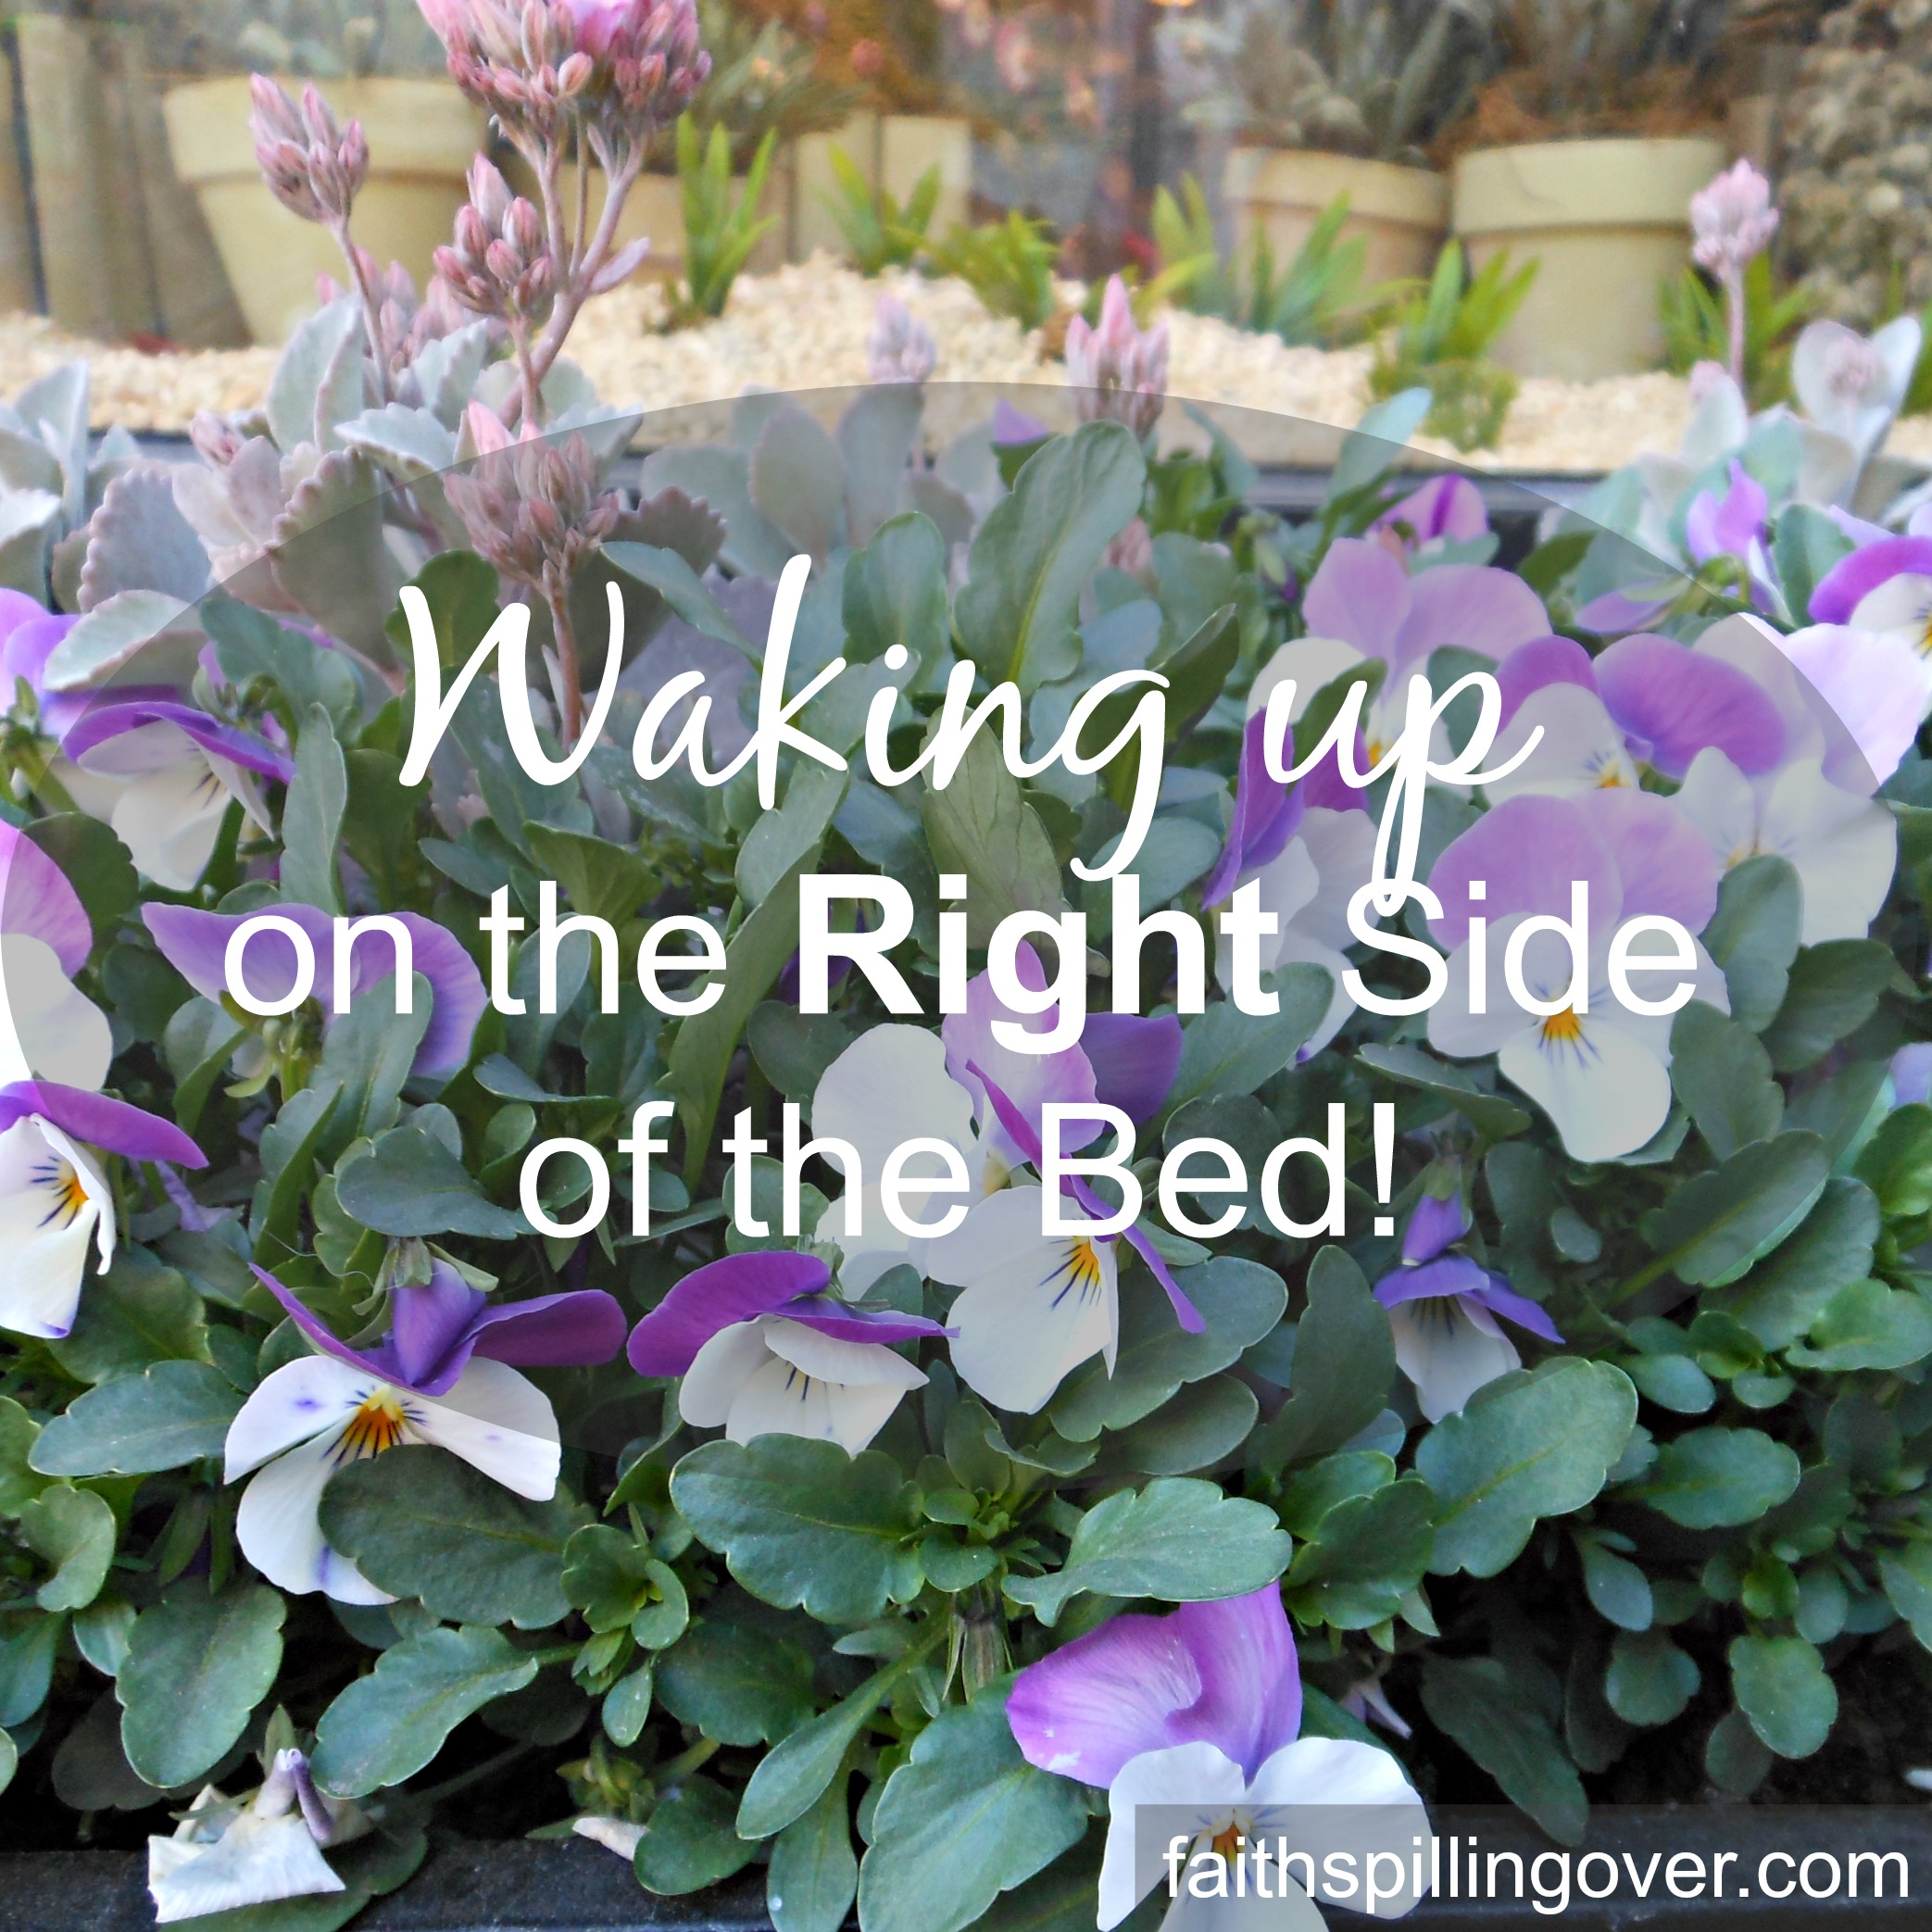 Waking Up on the Right Side of the Bed!